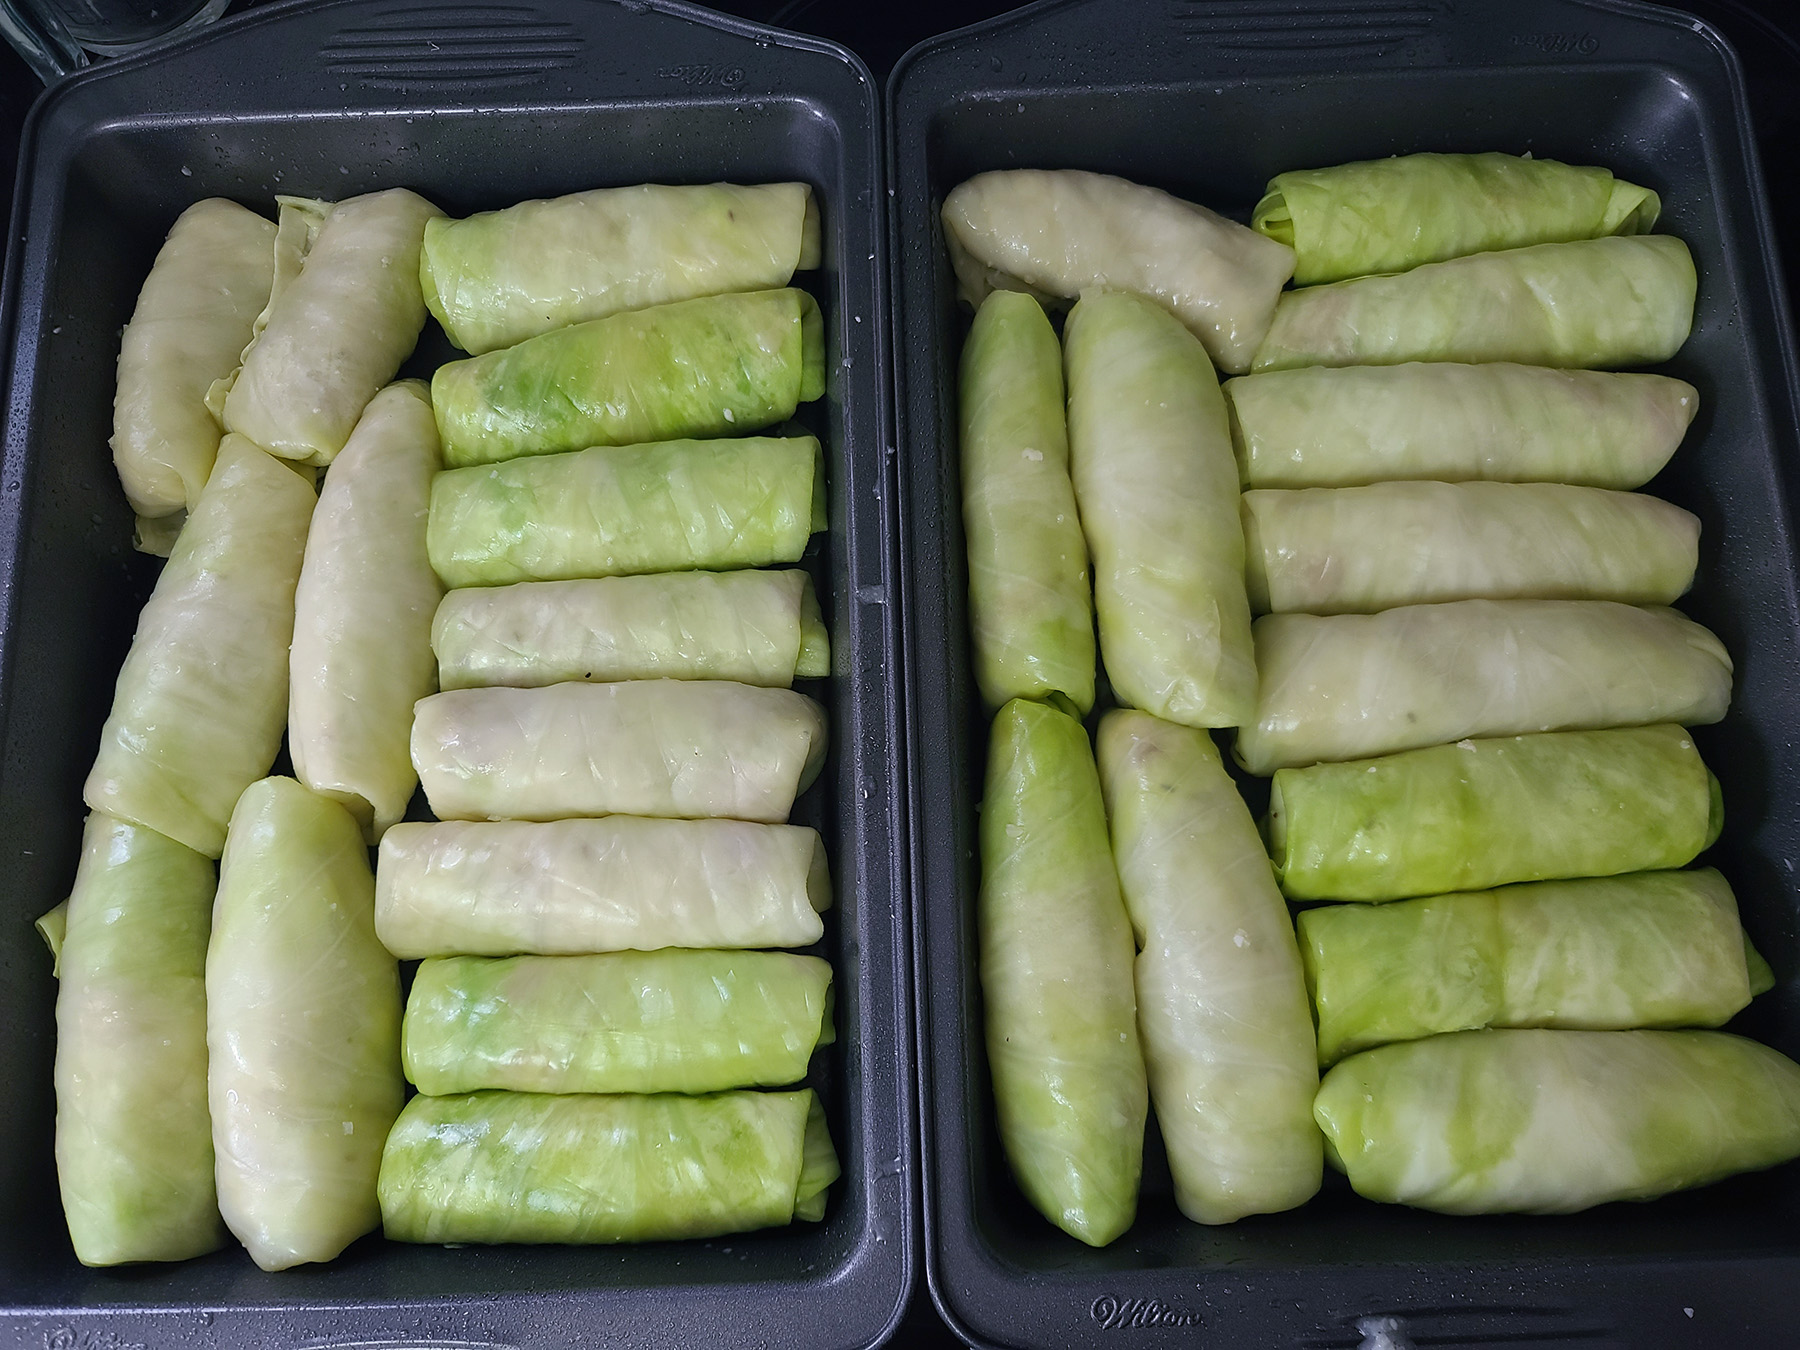 Two baking pans full of uncooked cabbage rolls.